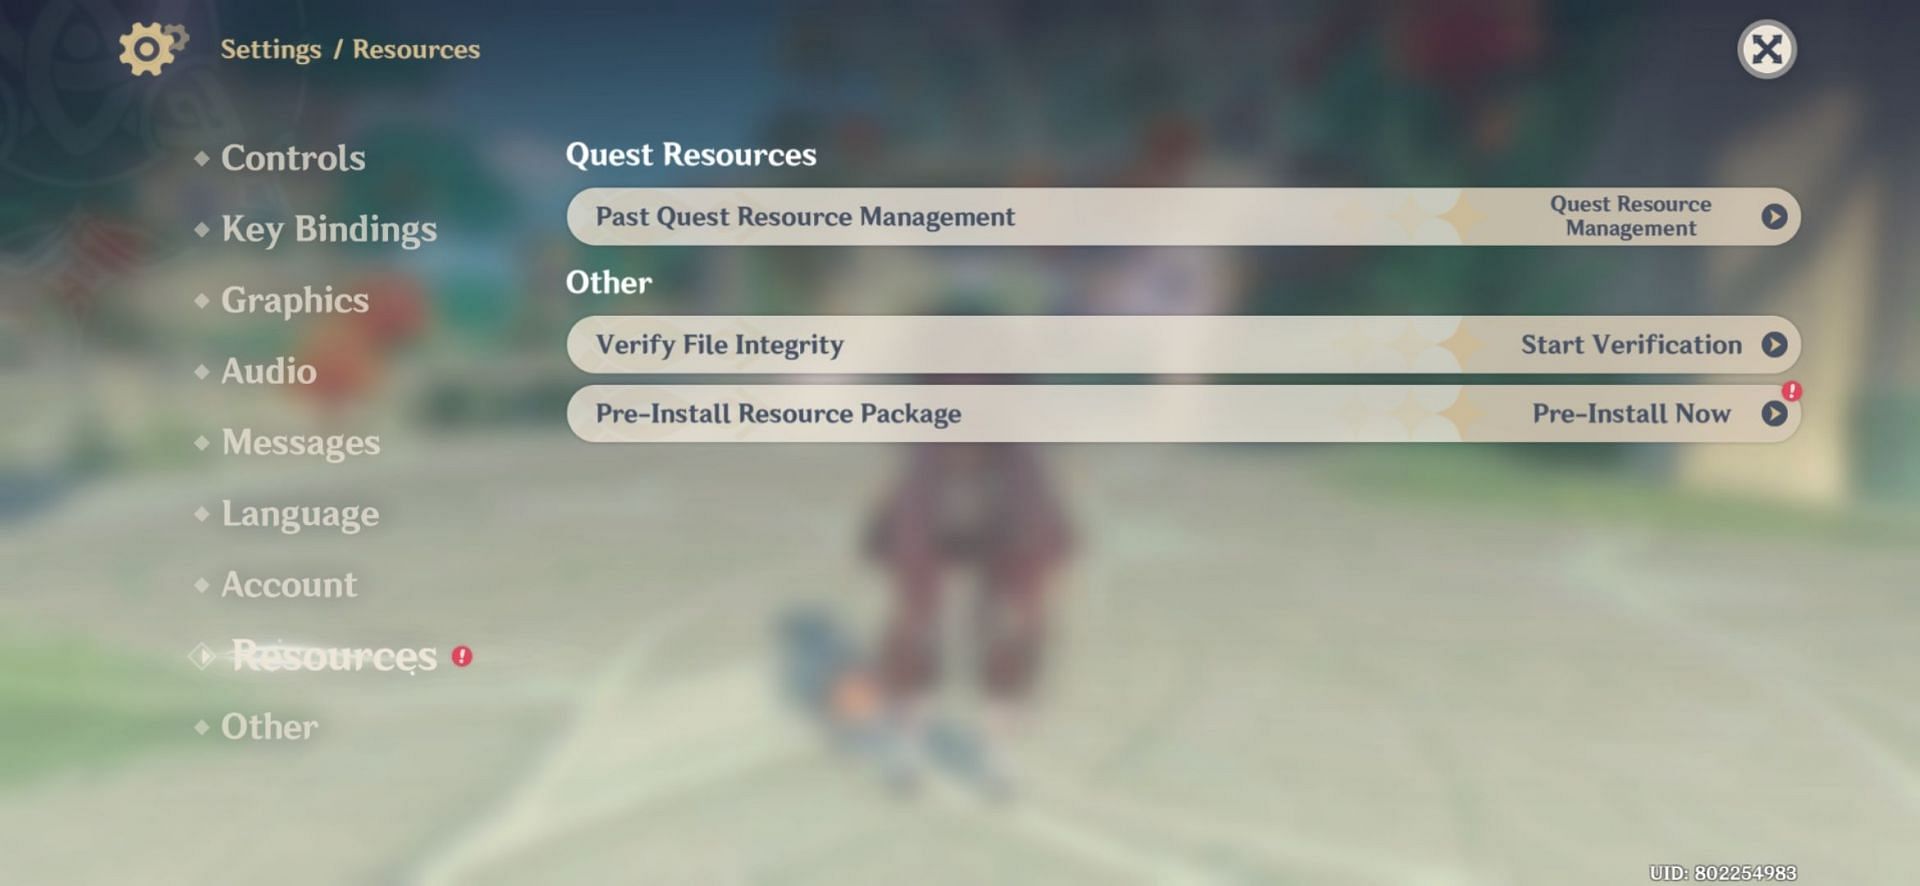 Pre-Install Resource Package from Setting (Image via HoYoverse)